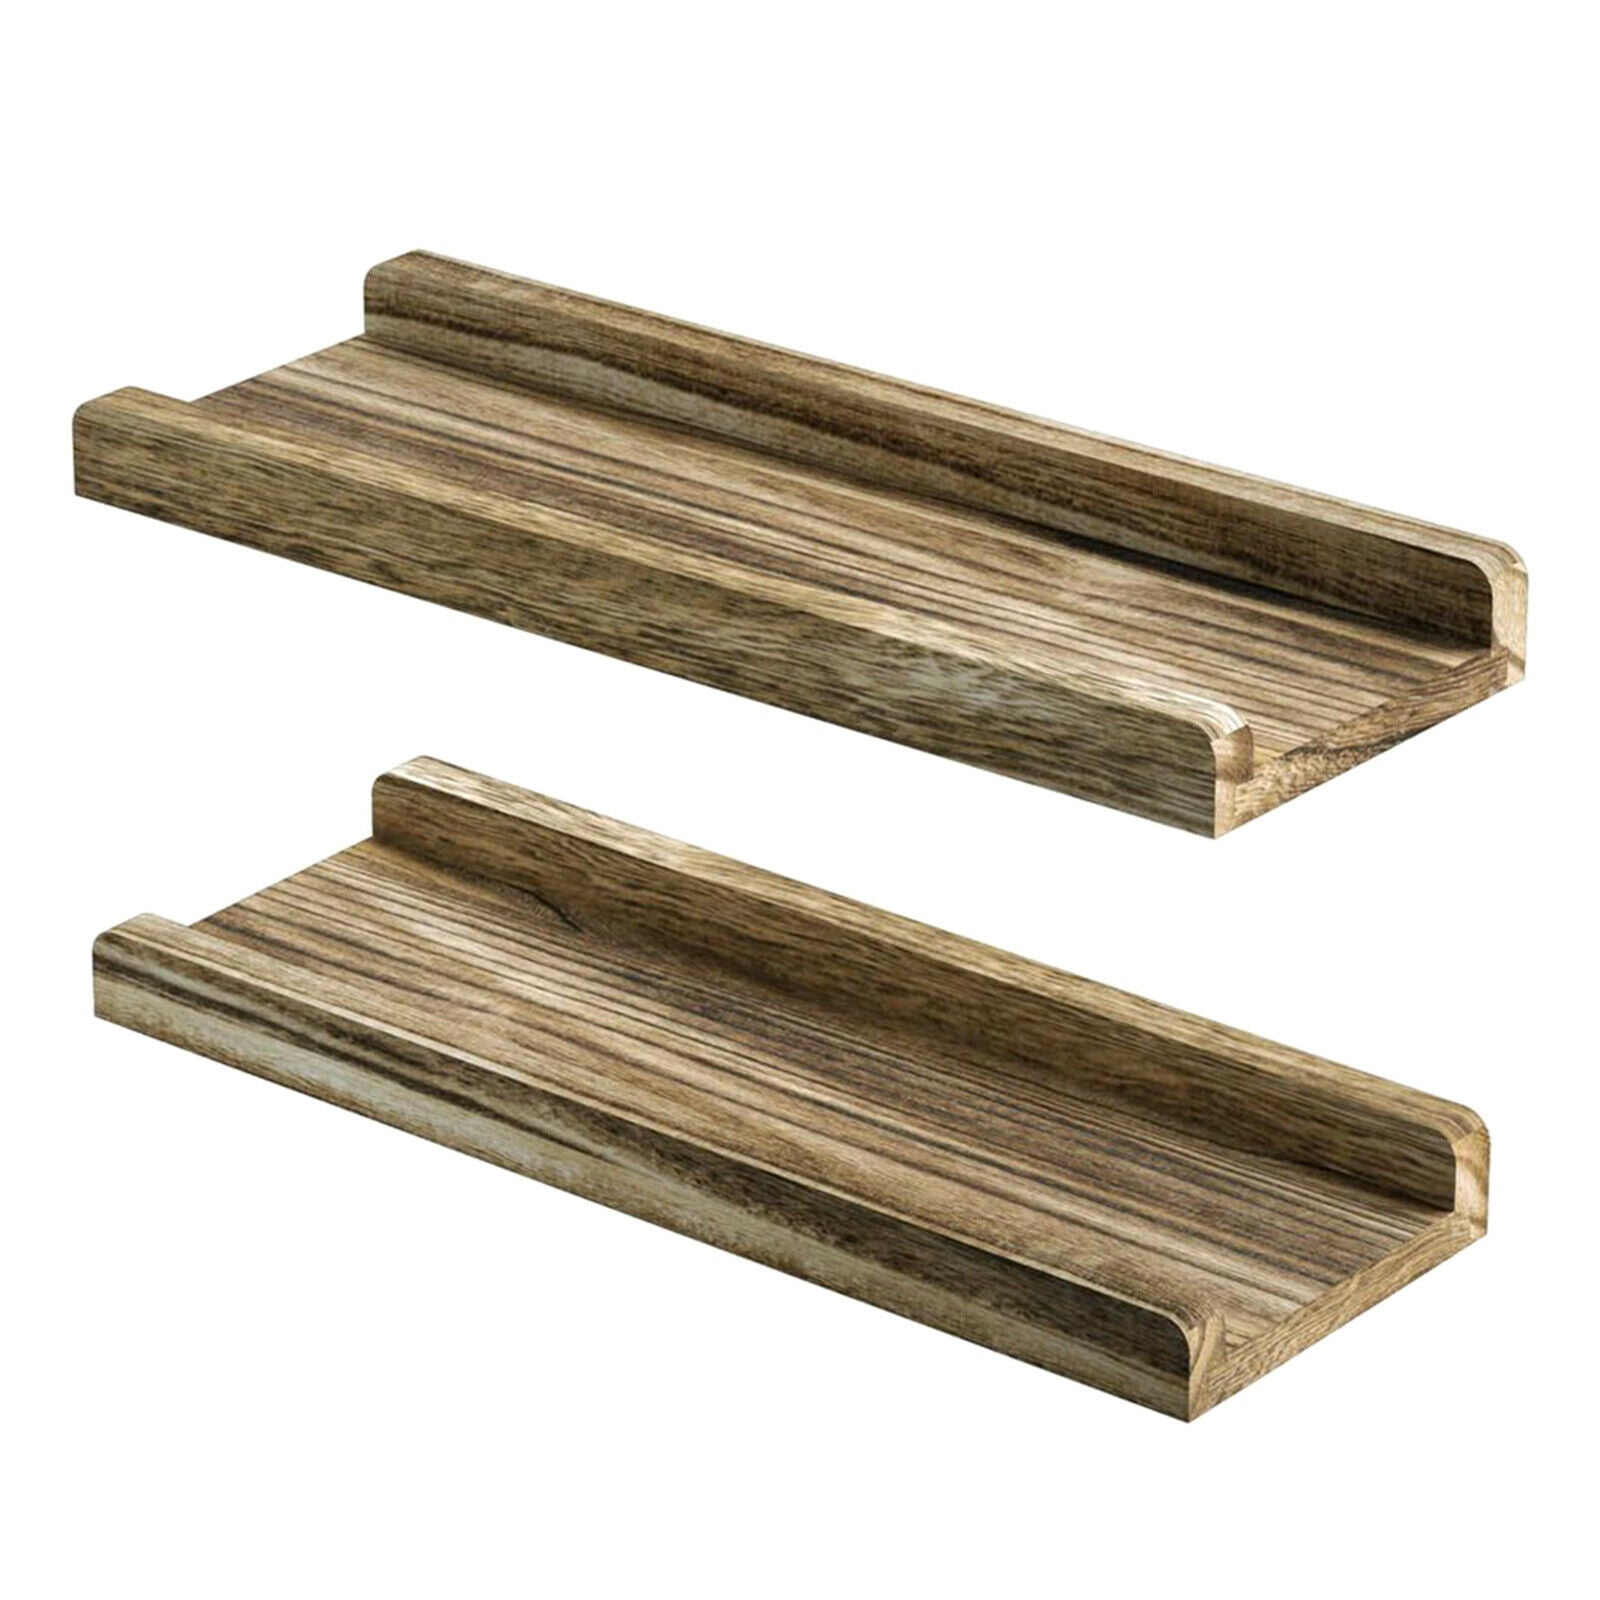 2pcs Wall Mounted Rustic Floating Shelves Wall Display Rack Decor Floating